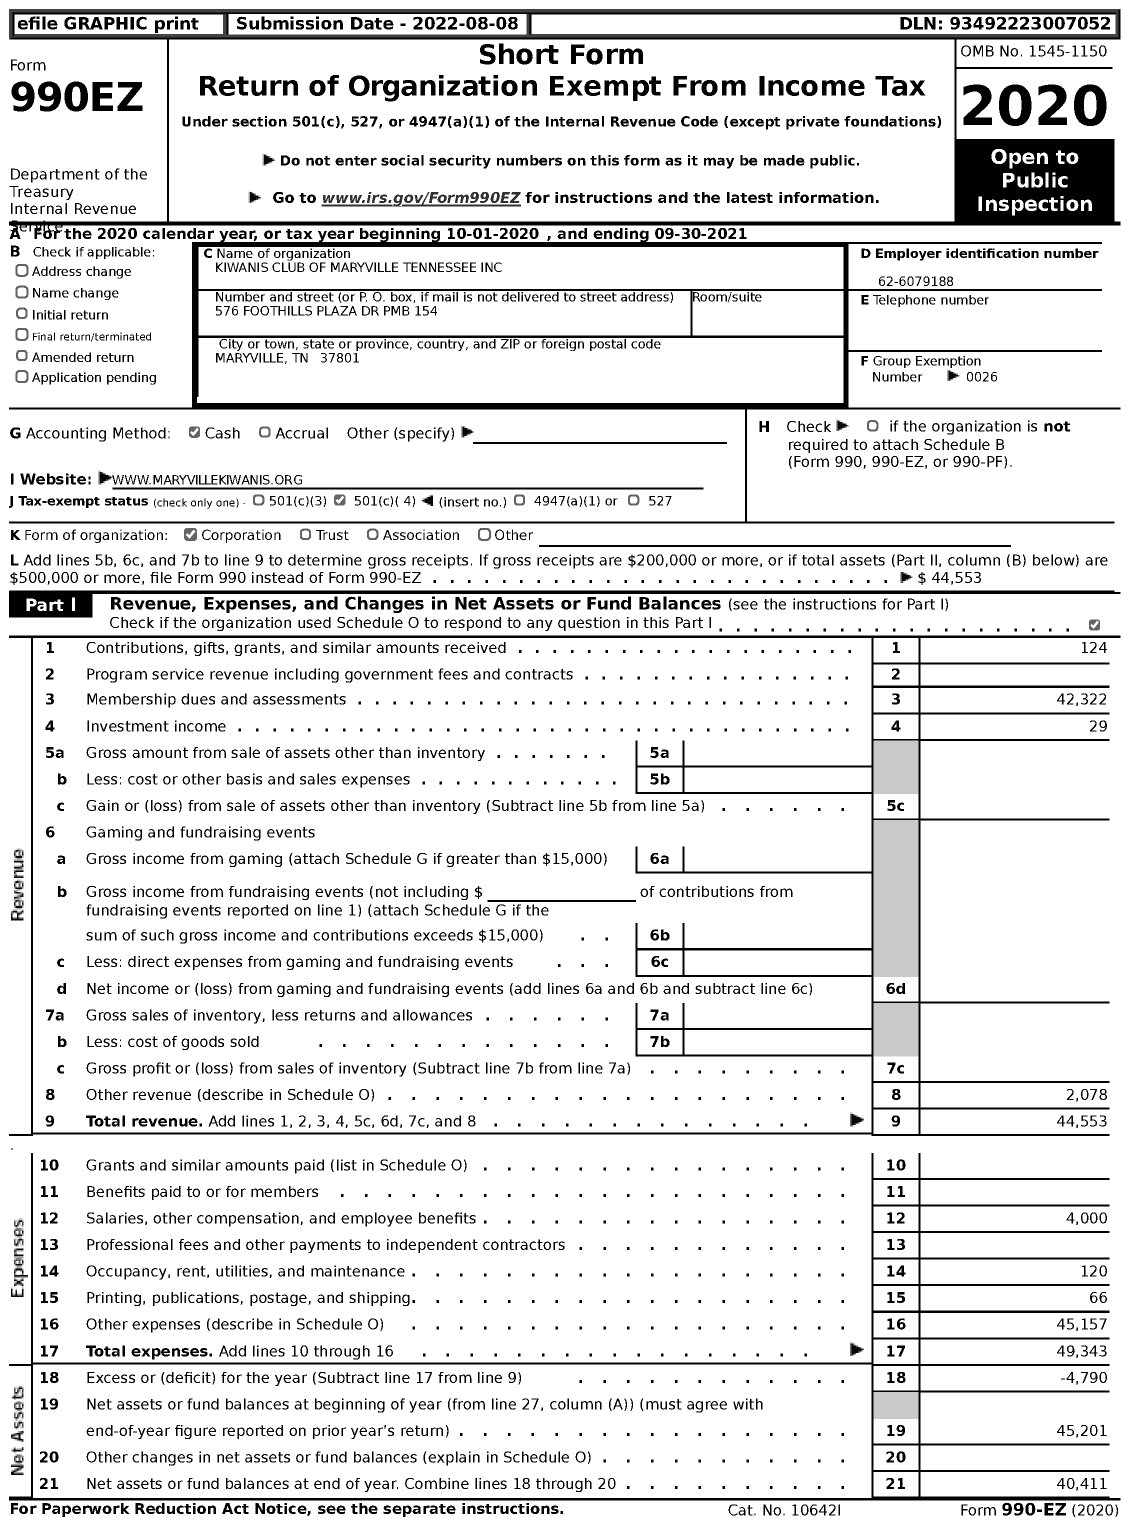 Image of first page of 2020 Form 990EZ for Kiwanis International - K00190 Maryville